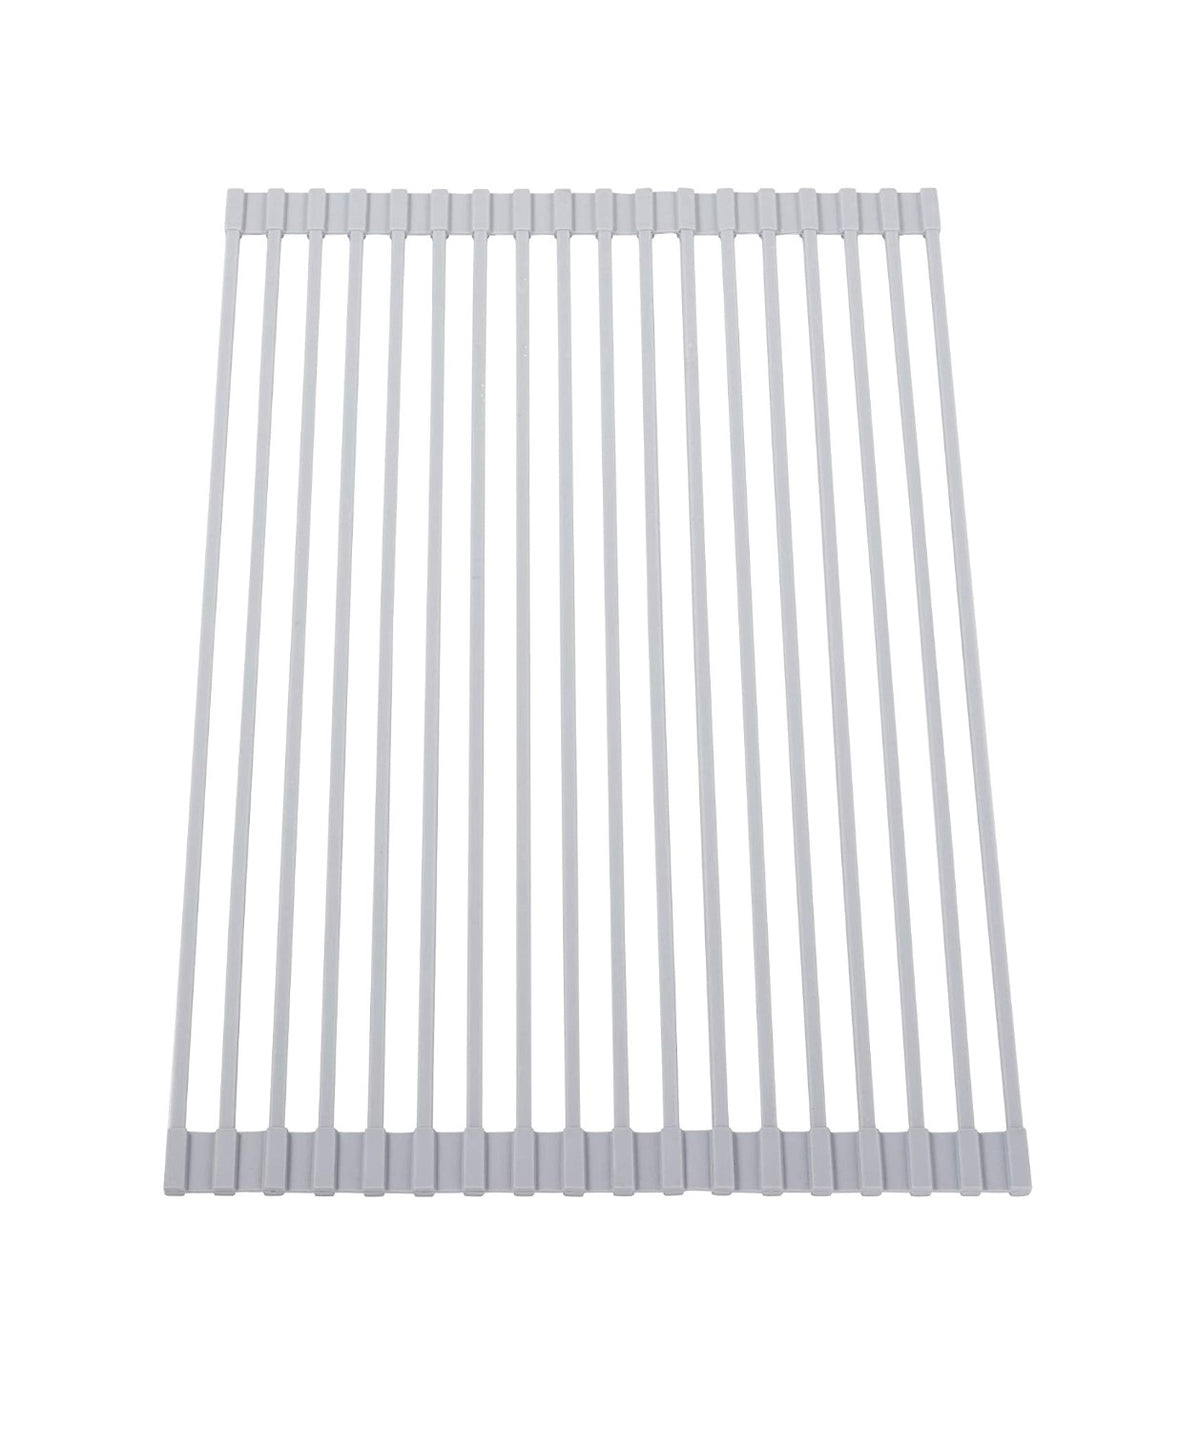 Multipurpose Roll Up Dish Drying Rack White Mat with